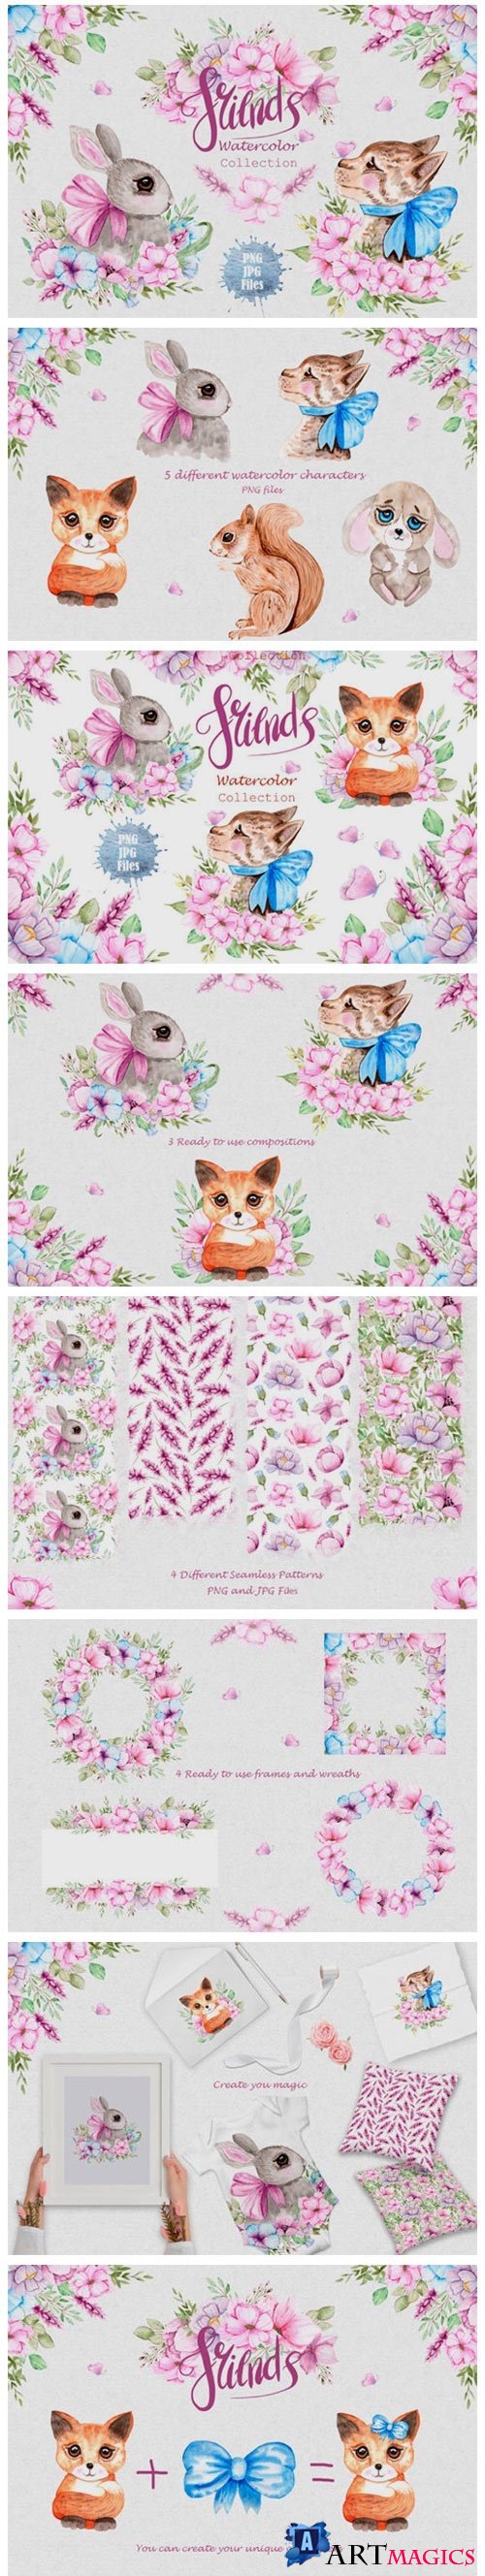 Watercolor Friends Collection - 4387977